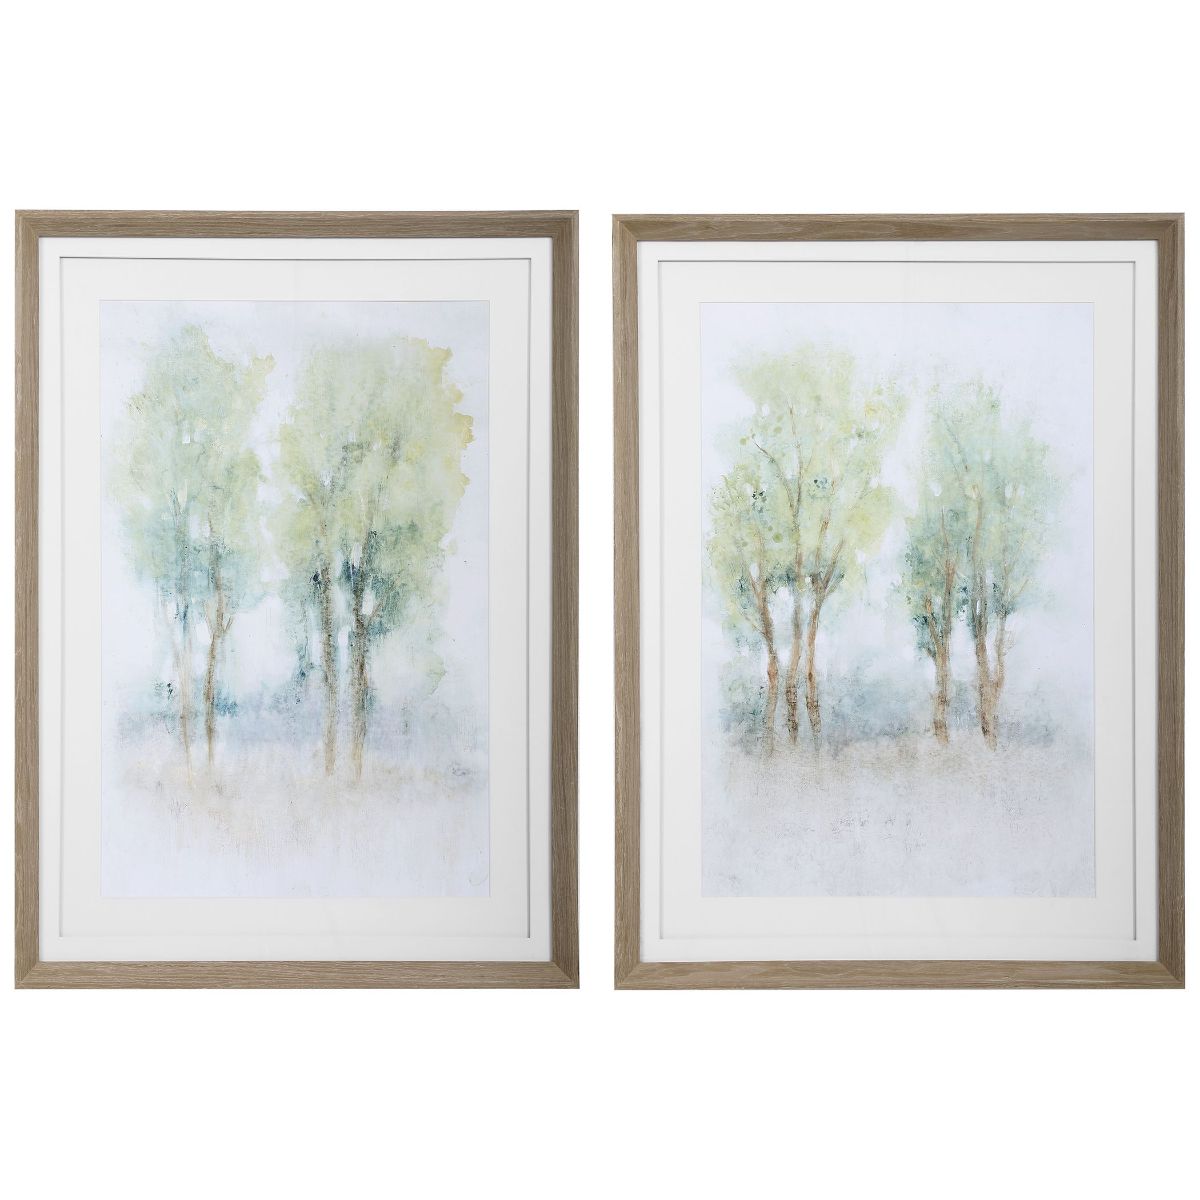 Uttermost Meadow View Framed Prints, S/2